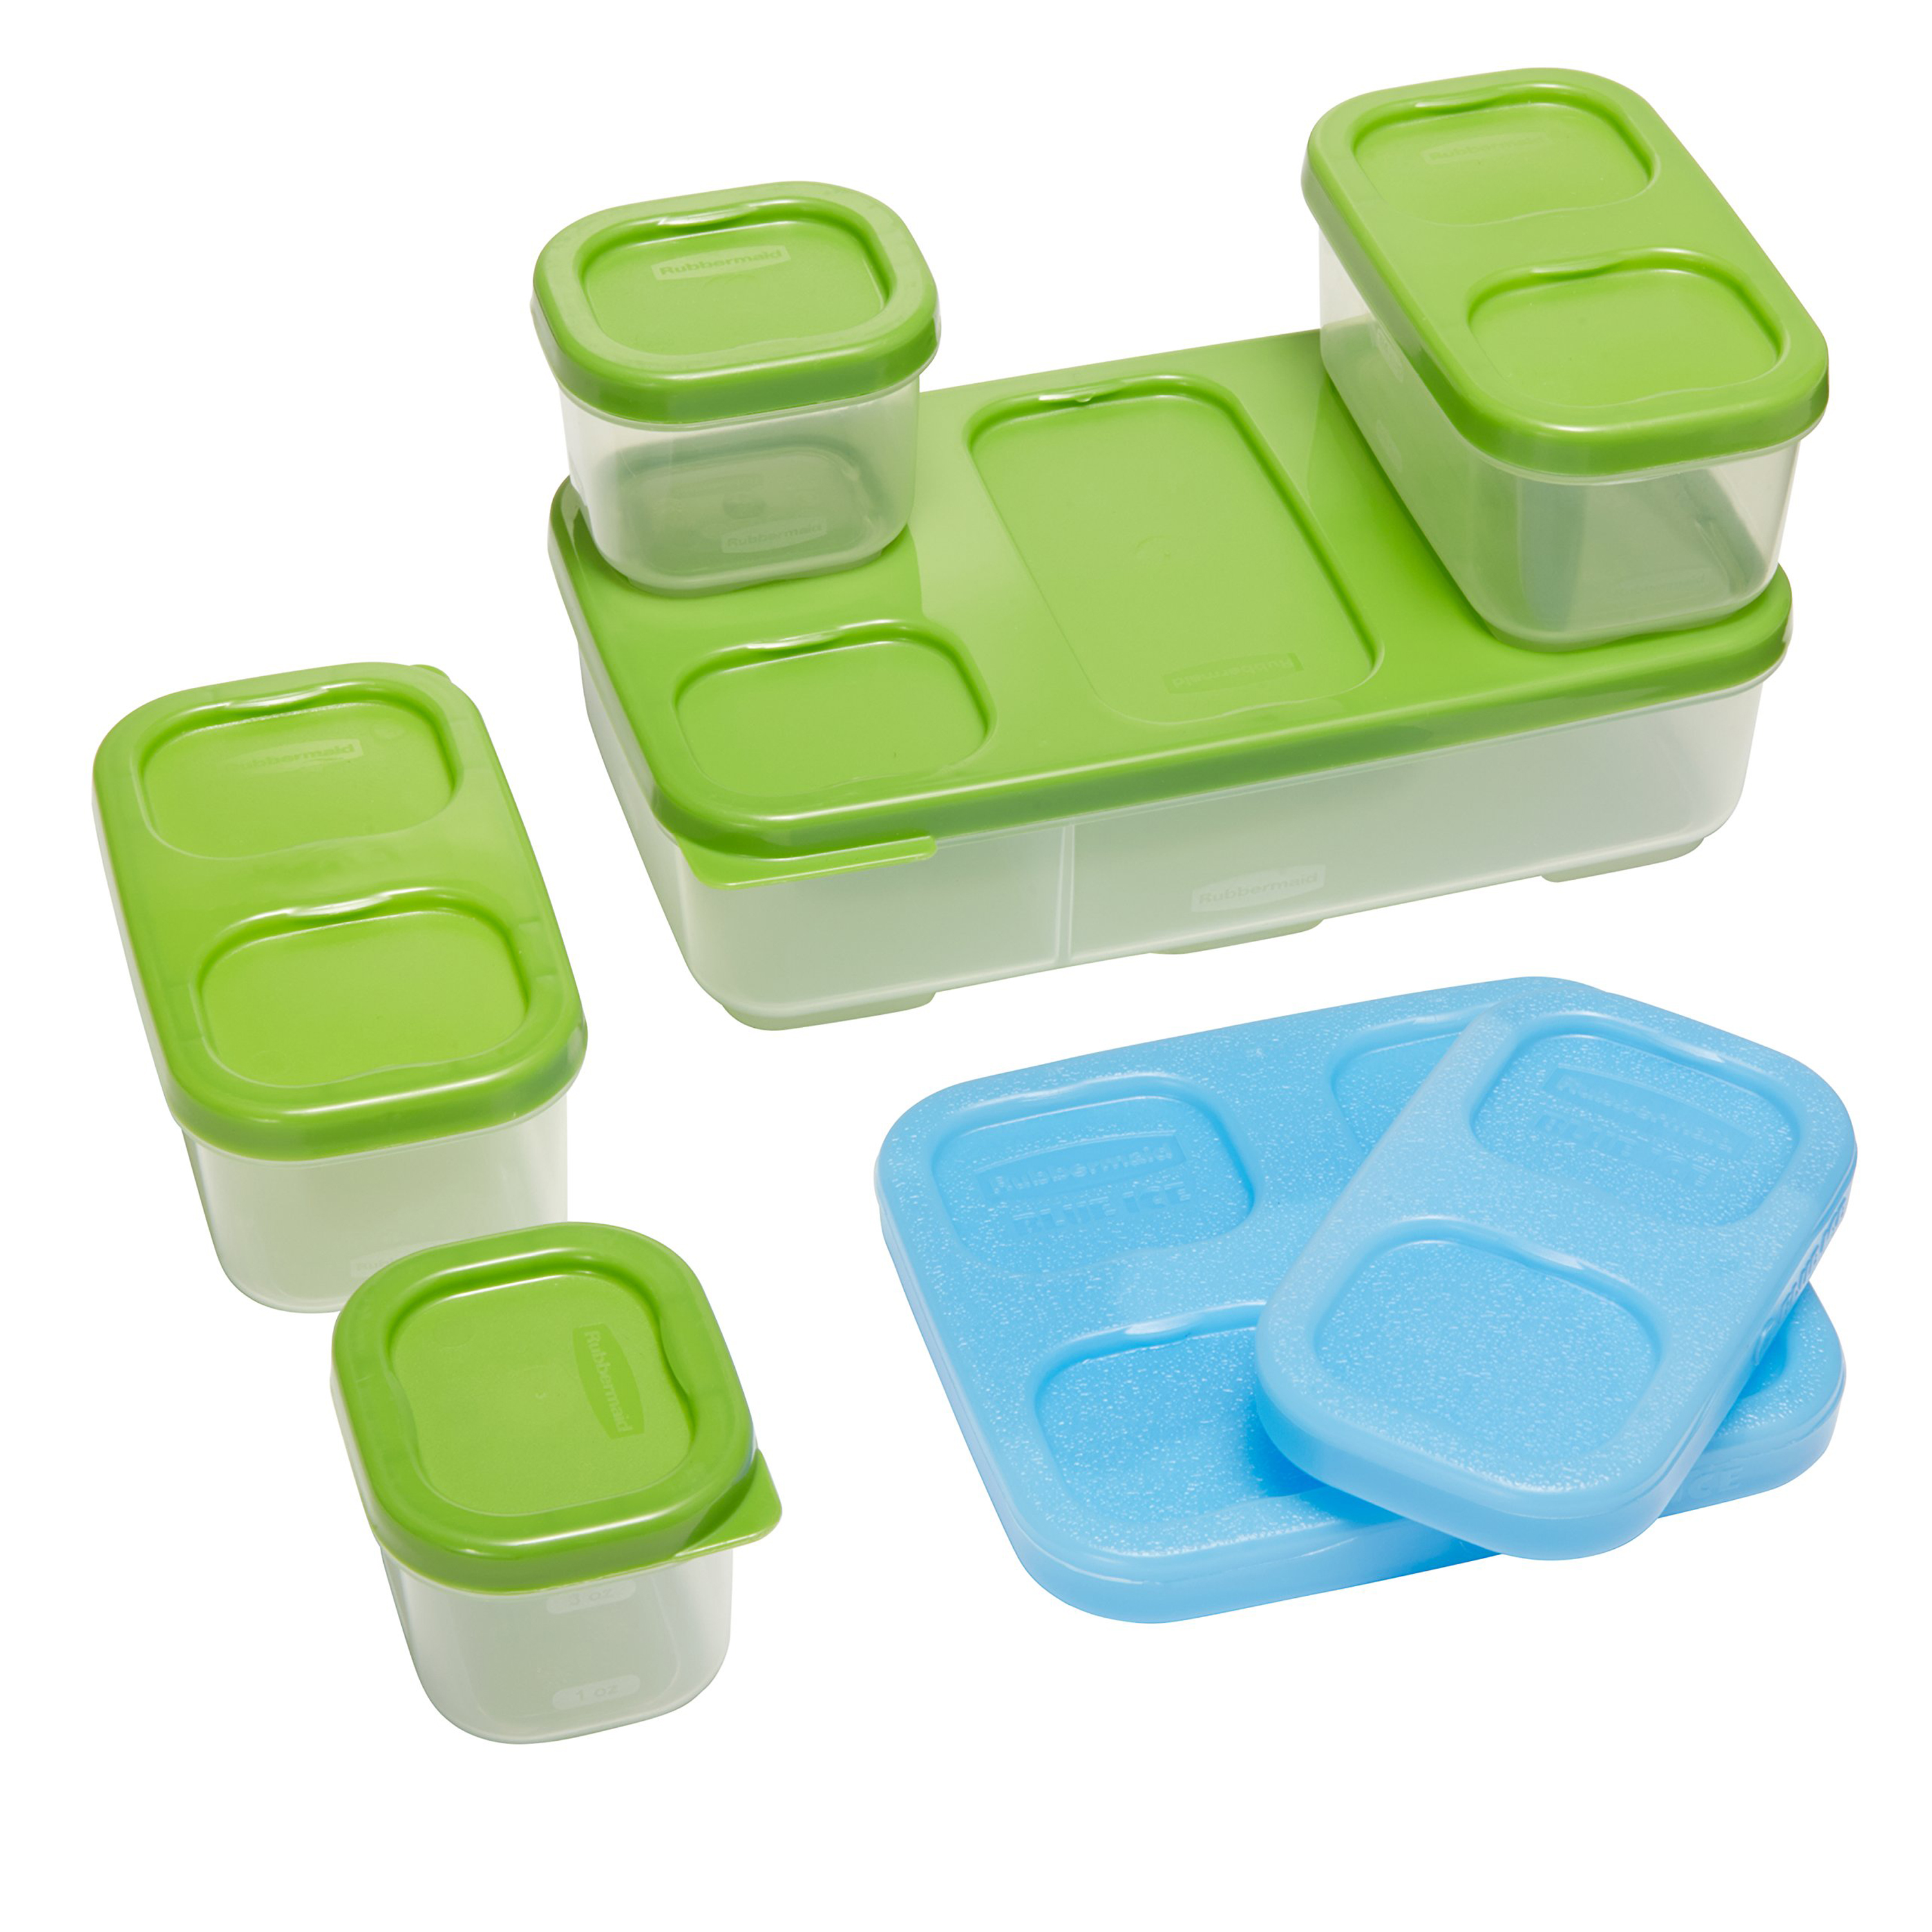 Rubbermaid LunchBlox 7-Piece Modular Entree Food Containers with Blue Ice Snap-Ins - image 1 of 4